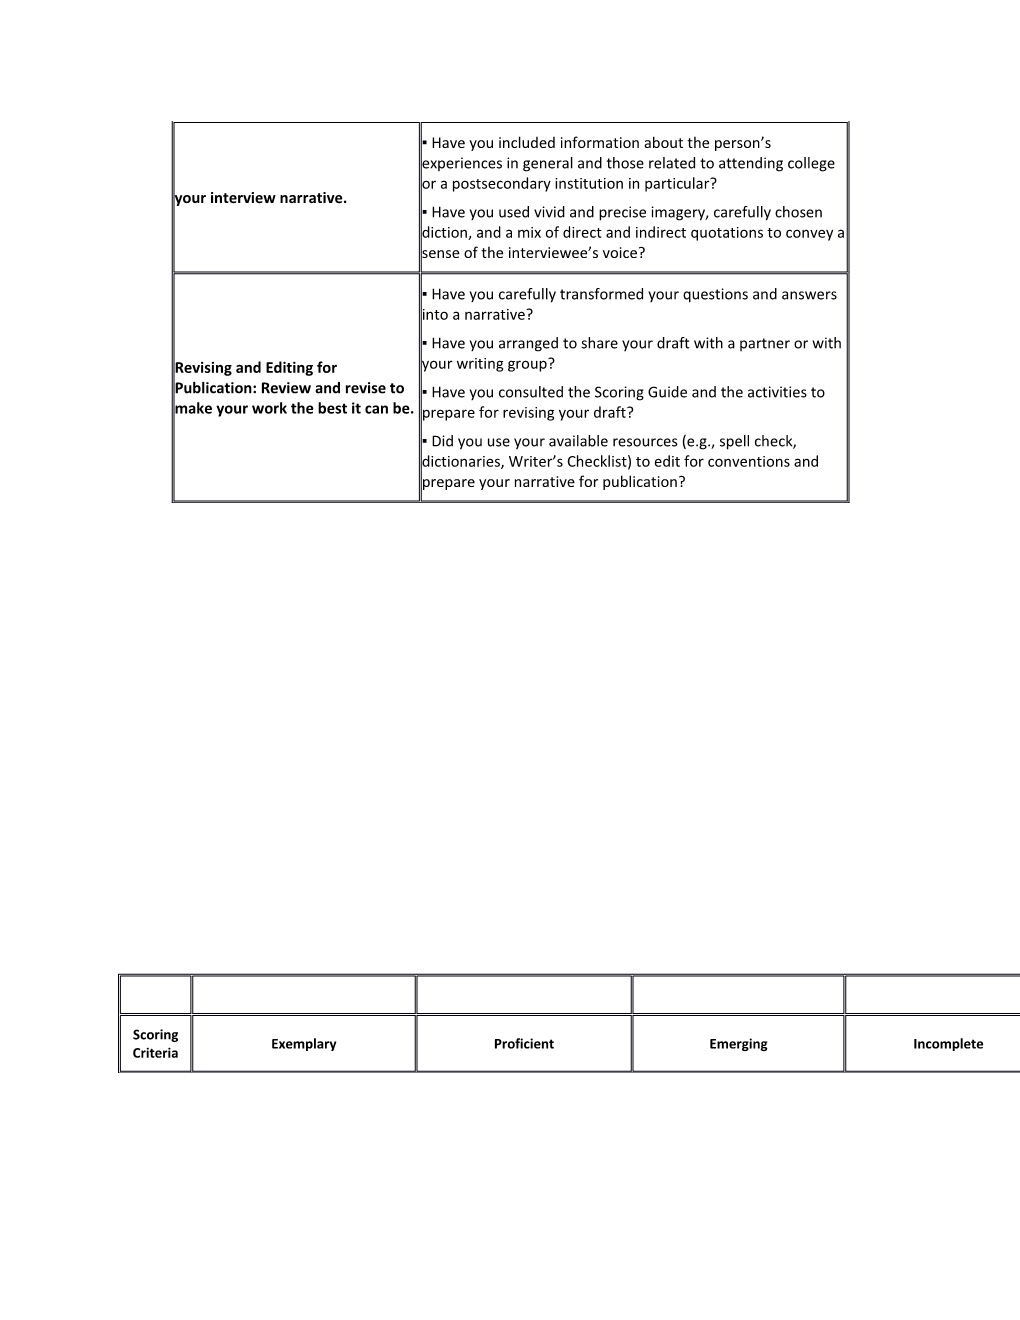 EA #1 Work Plan and Examples